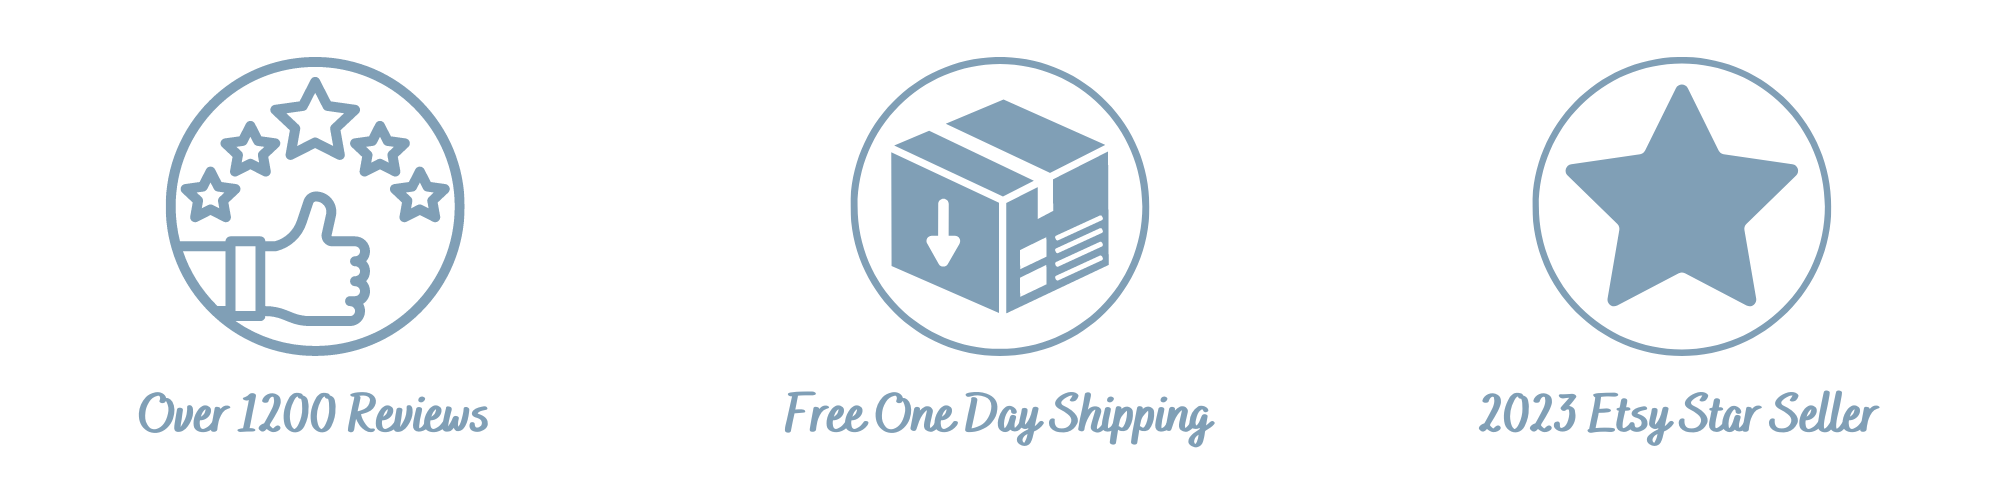 Free One Day Shipping